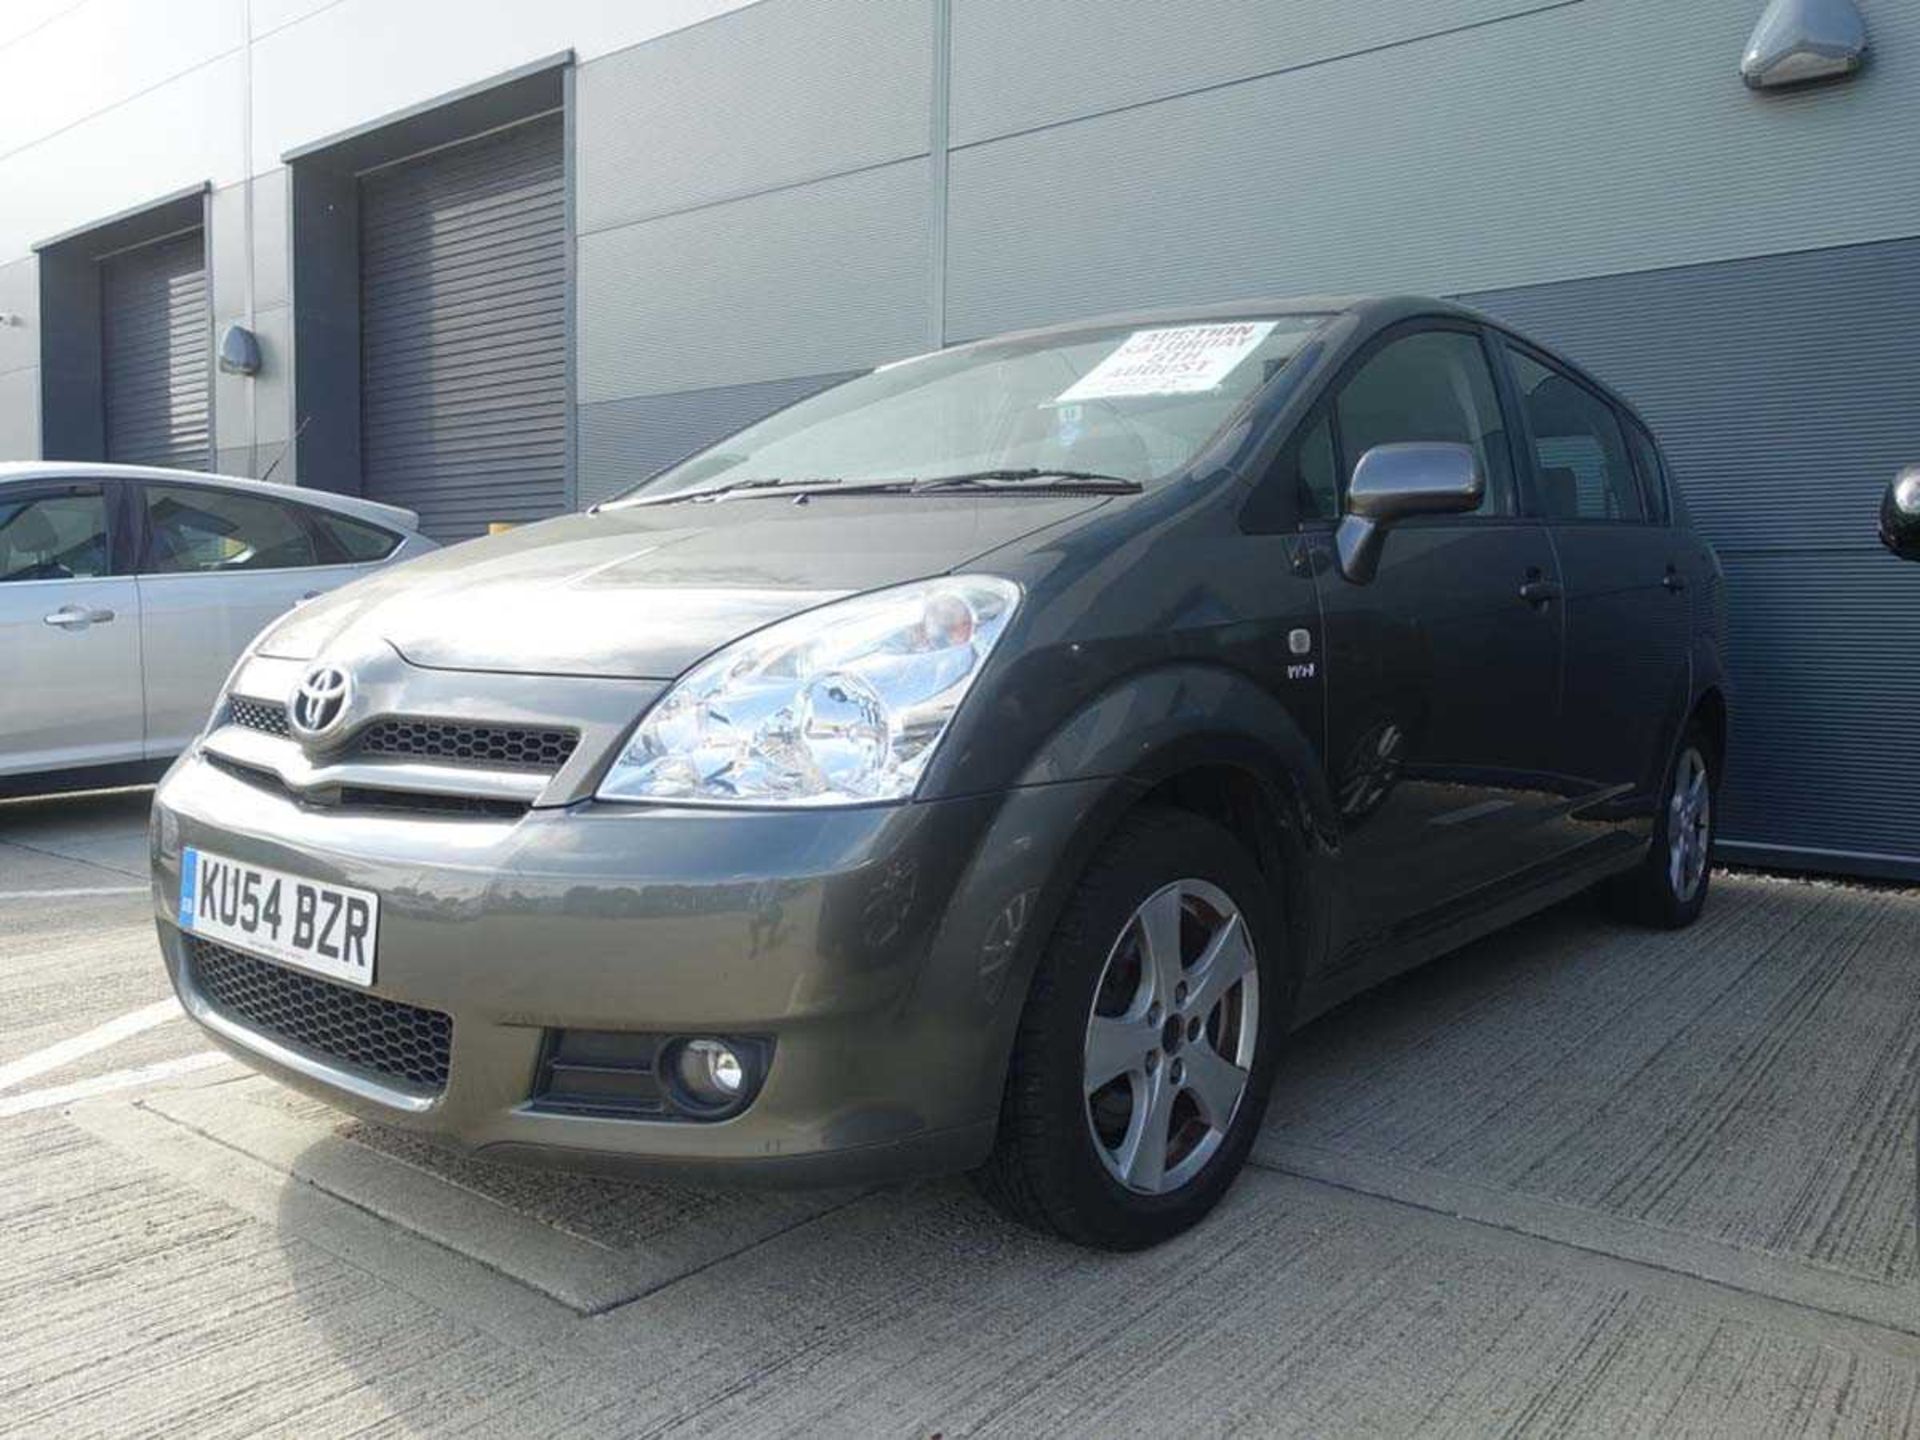 2004 Toyota Corolla Verso VVT-I T3 in grey, petrol, first registered 30/09/2004, Mot until 28/12/ - Image 3 of 9